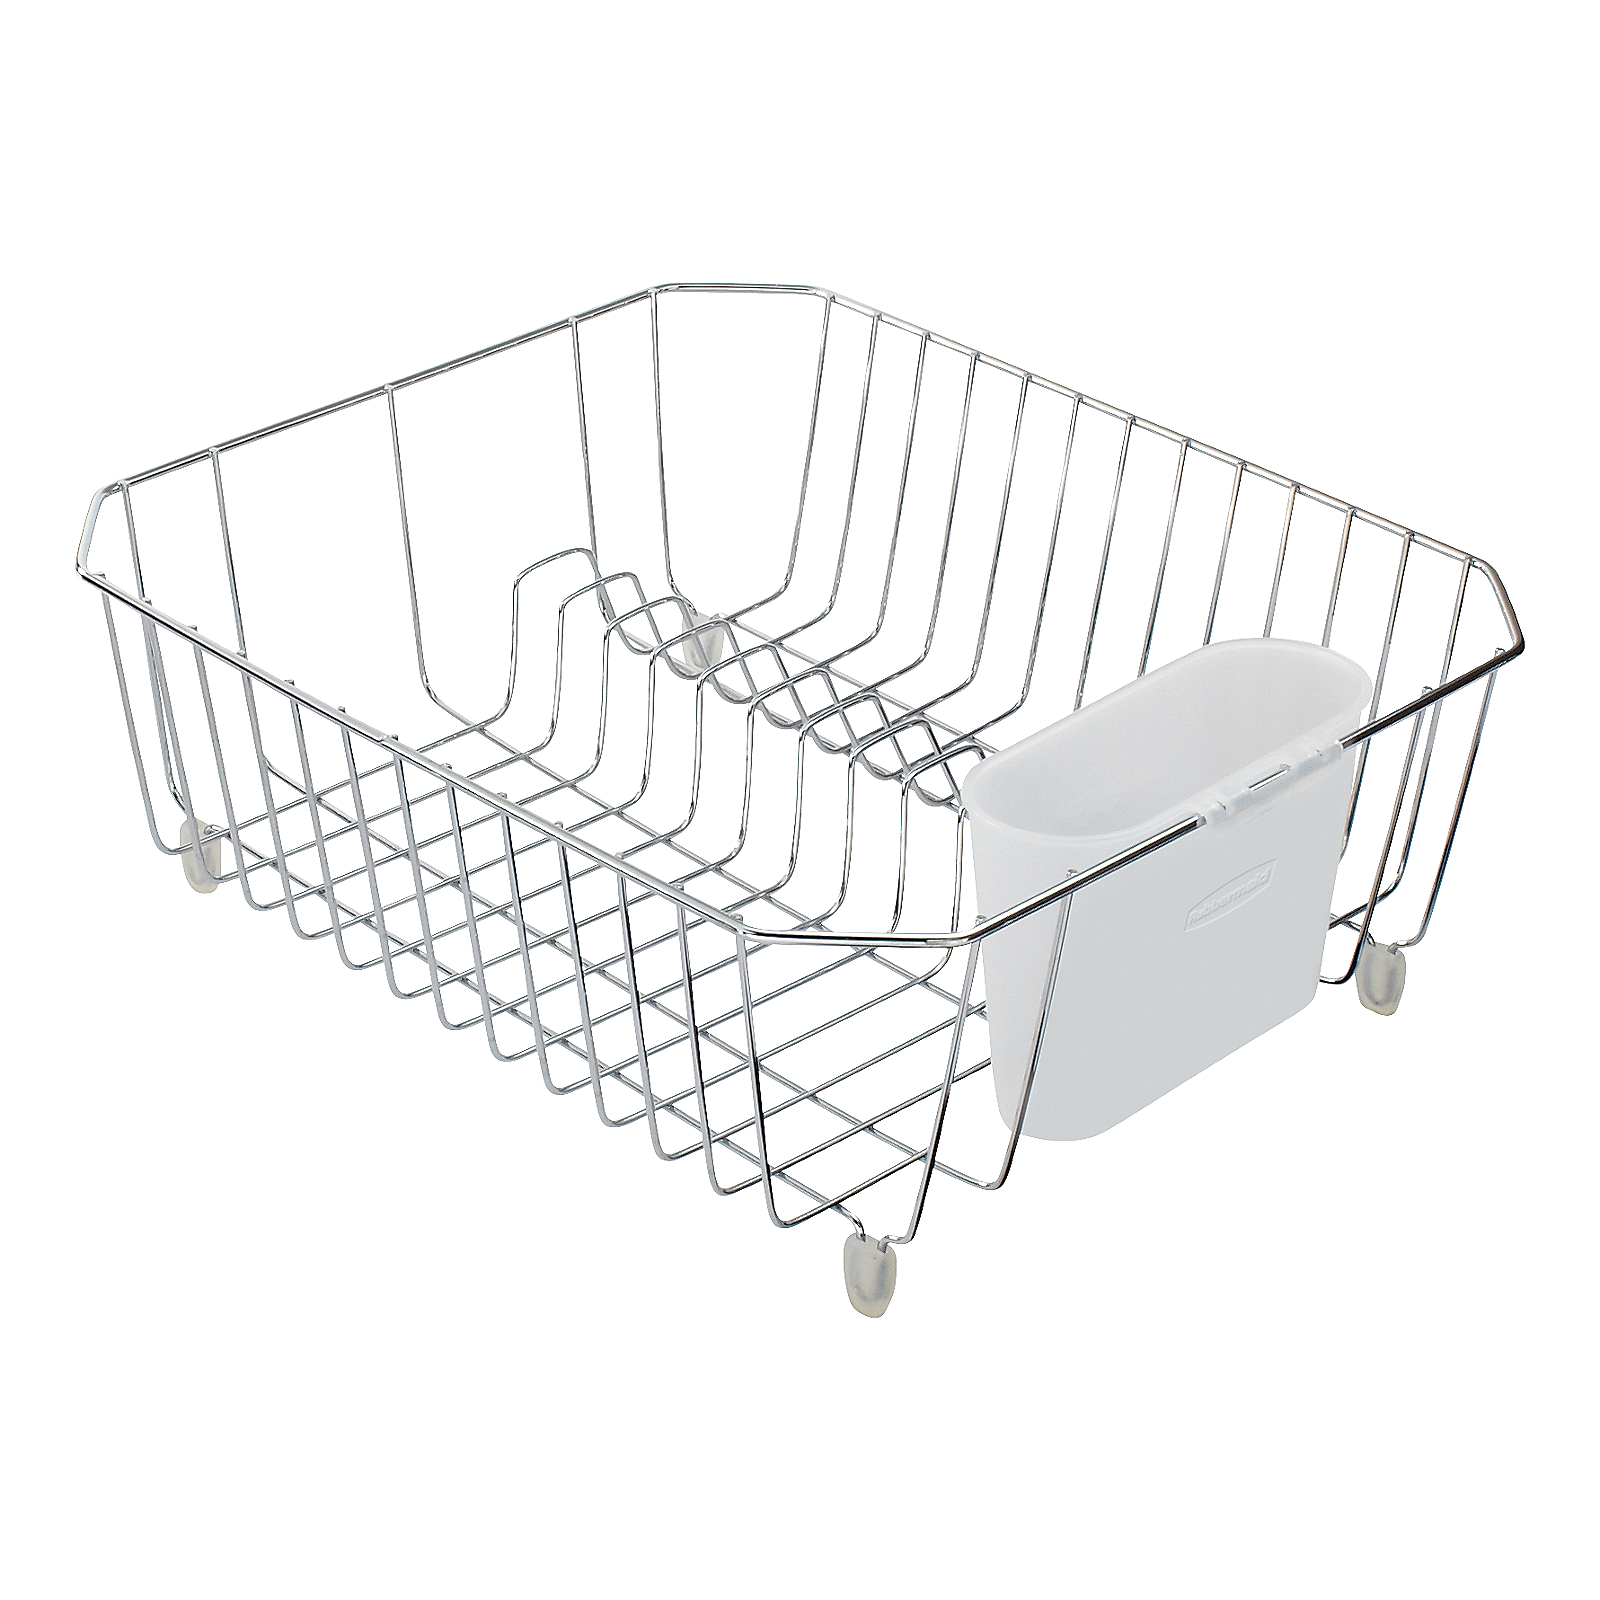 Rubbermaid Small Antimicrobial Dish Drainer